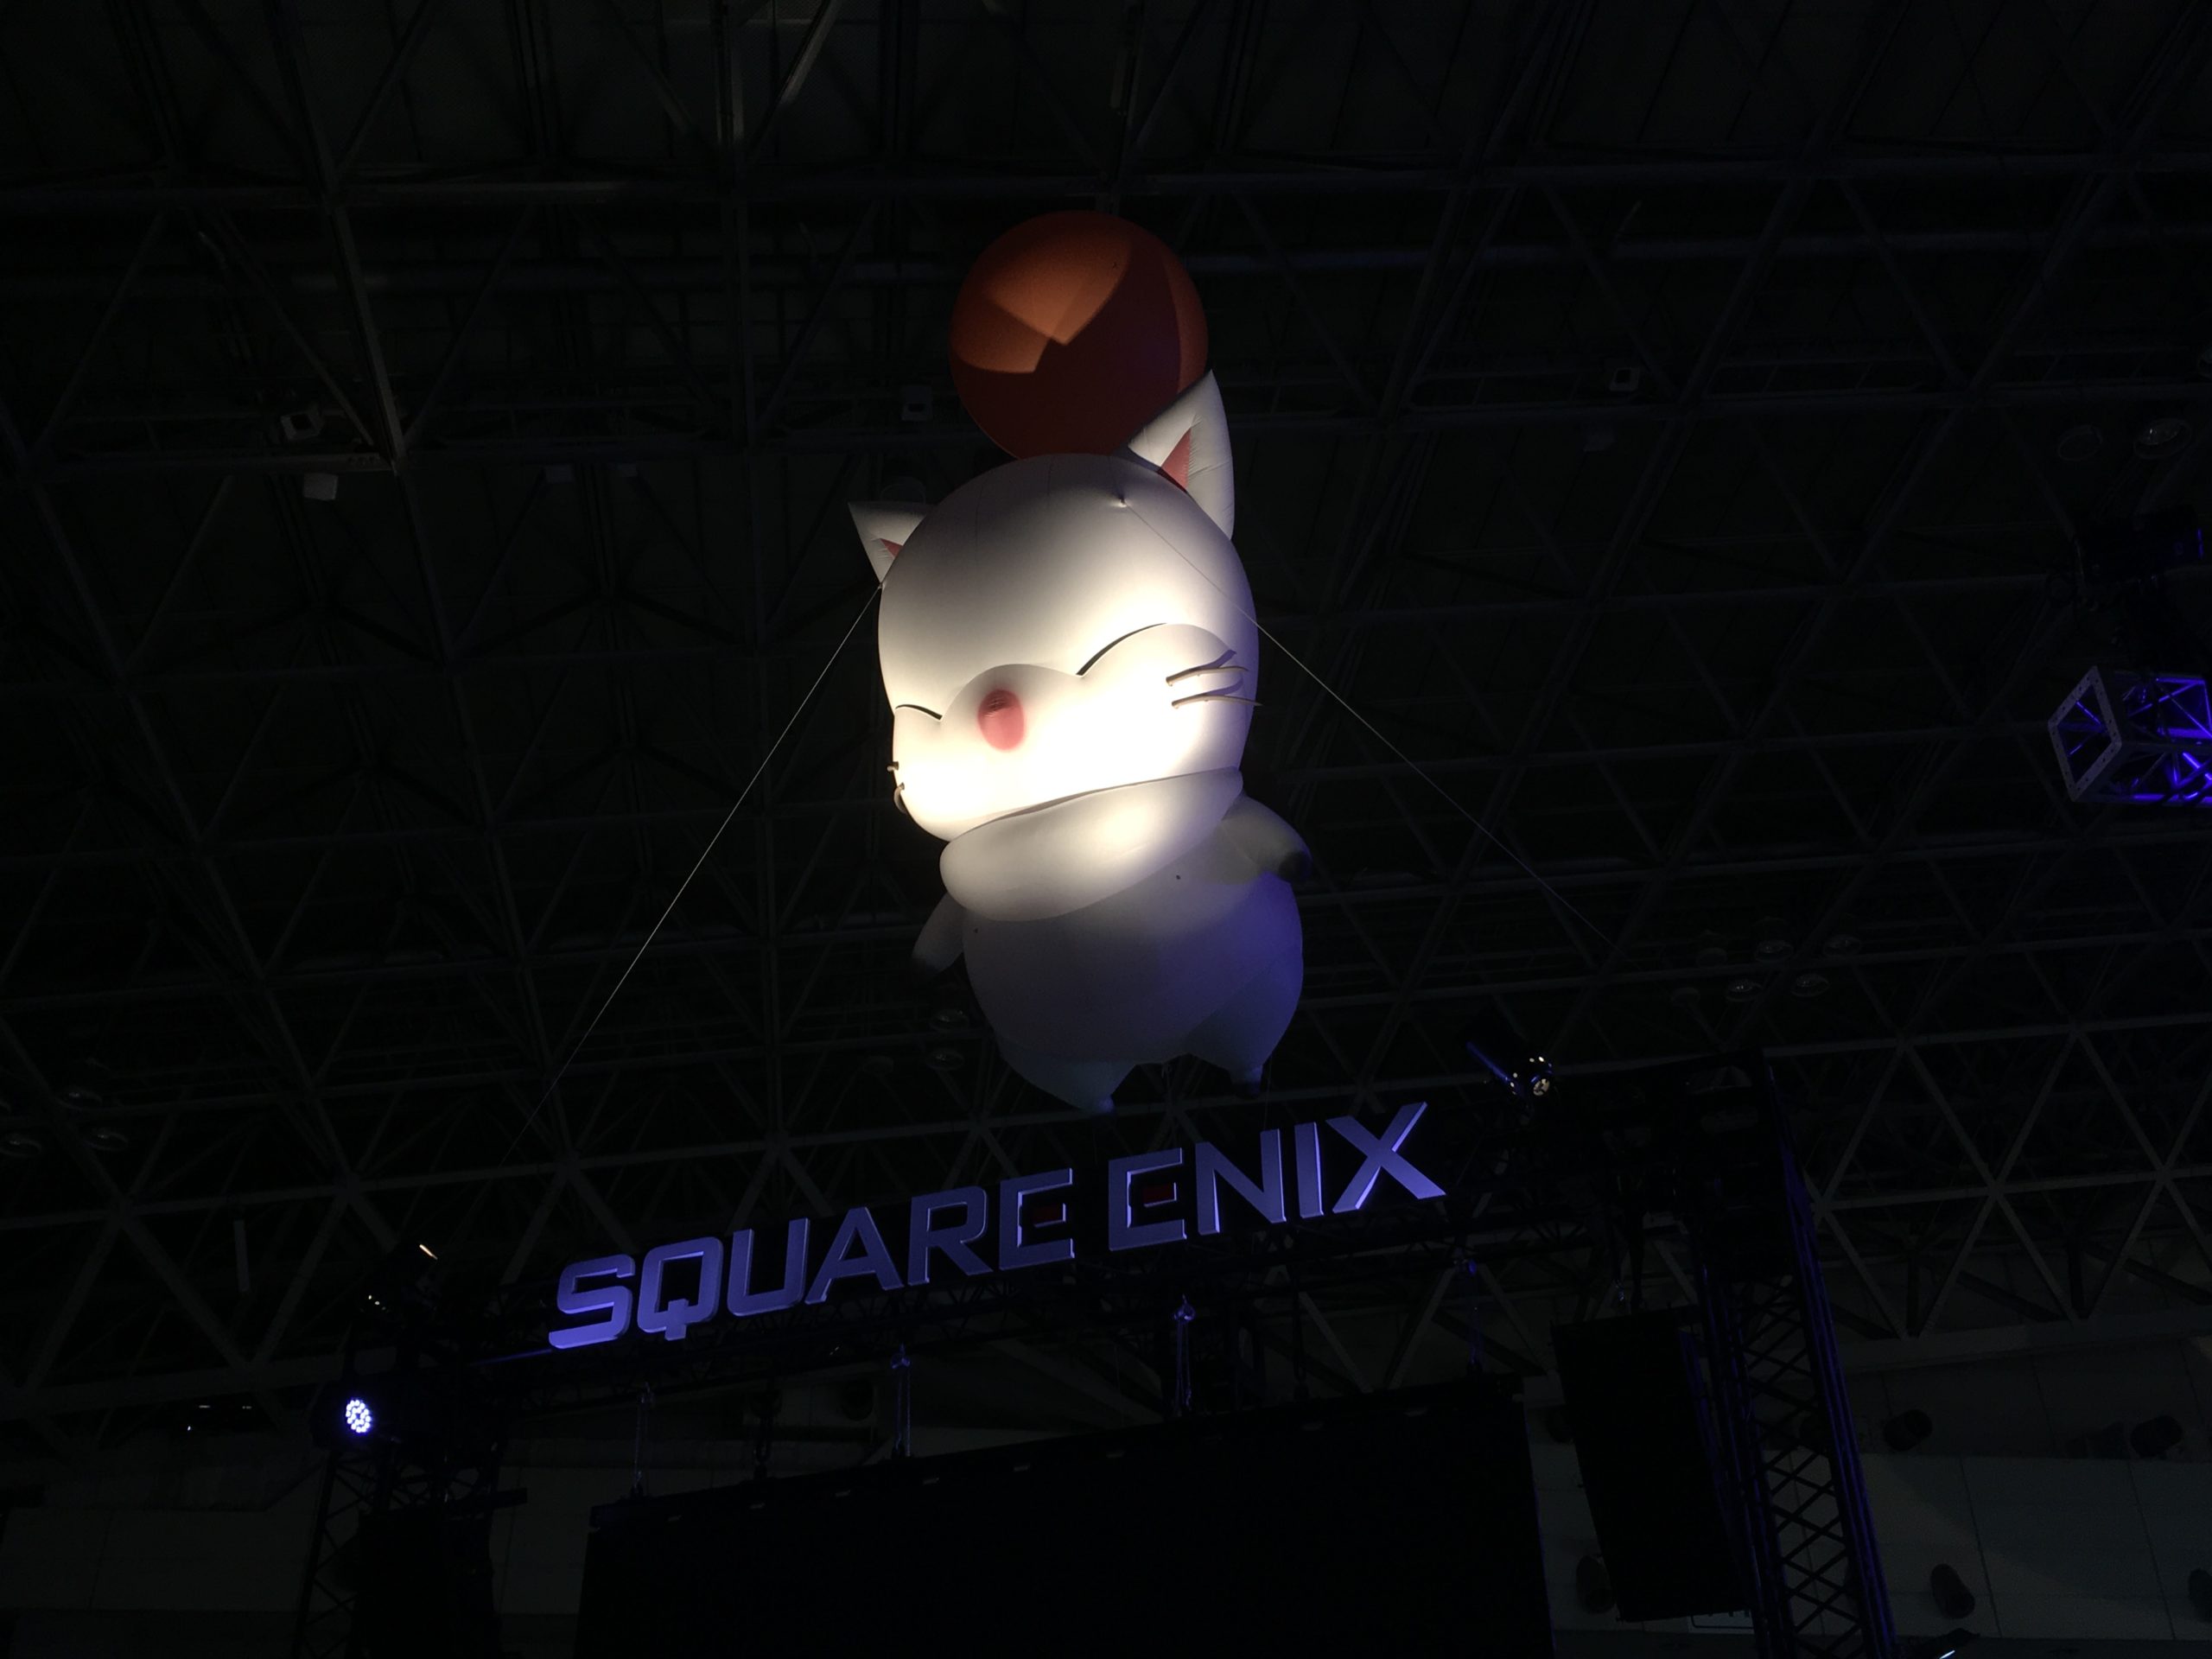 The Booths Of The Tokyo Game Show 2017